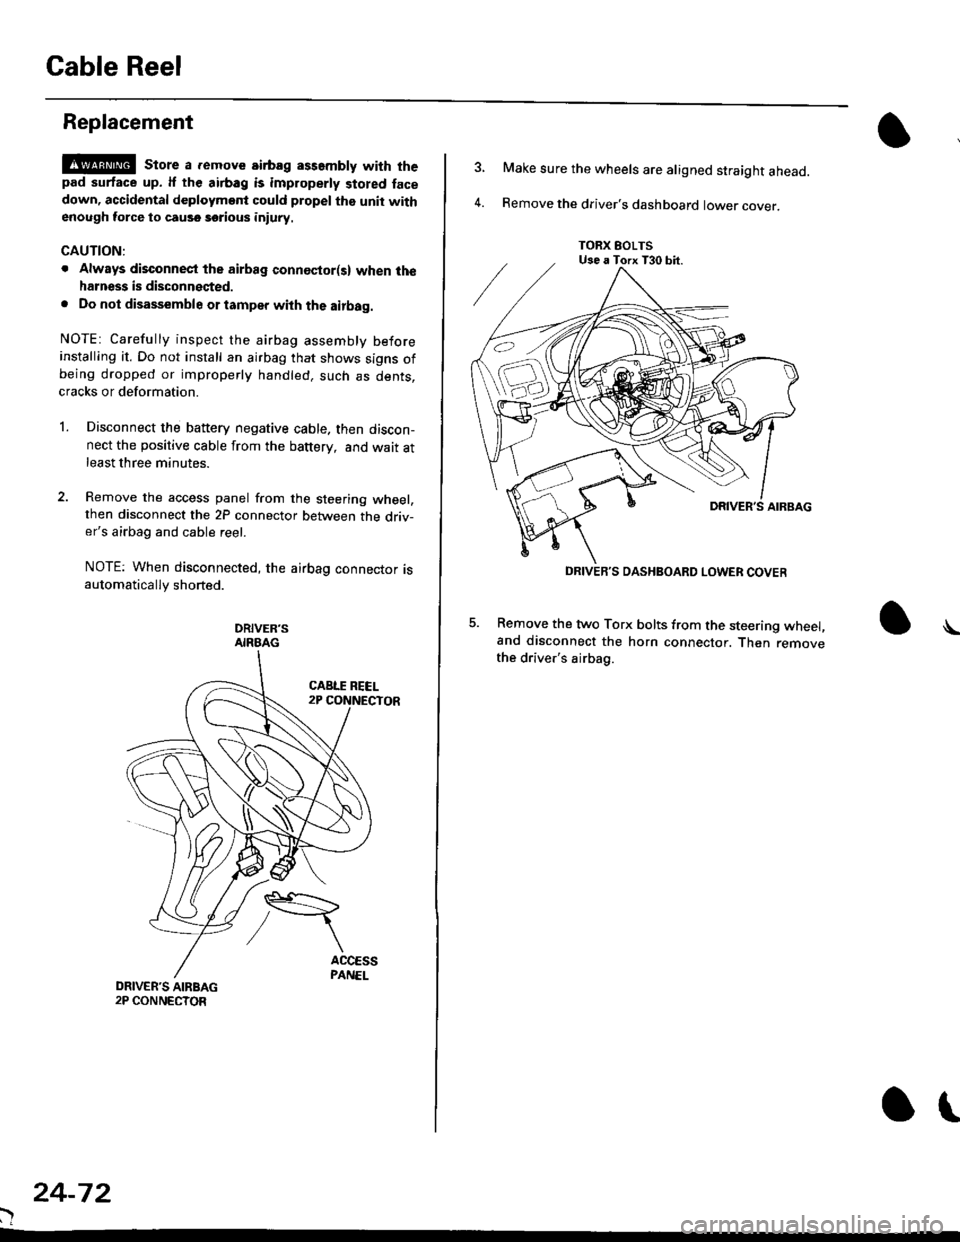 HONDA CIVIC 1996 6.G Manual PDF Gable Reel
Replacement
!@@ store a .emove airbag assambly with thepad surtace up. lf the airbag is improperly stored face
down, accidental deploymont could propel the unit withenough force to cause so